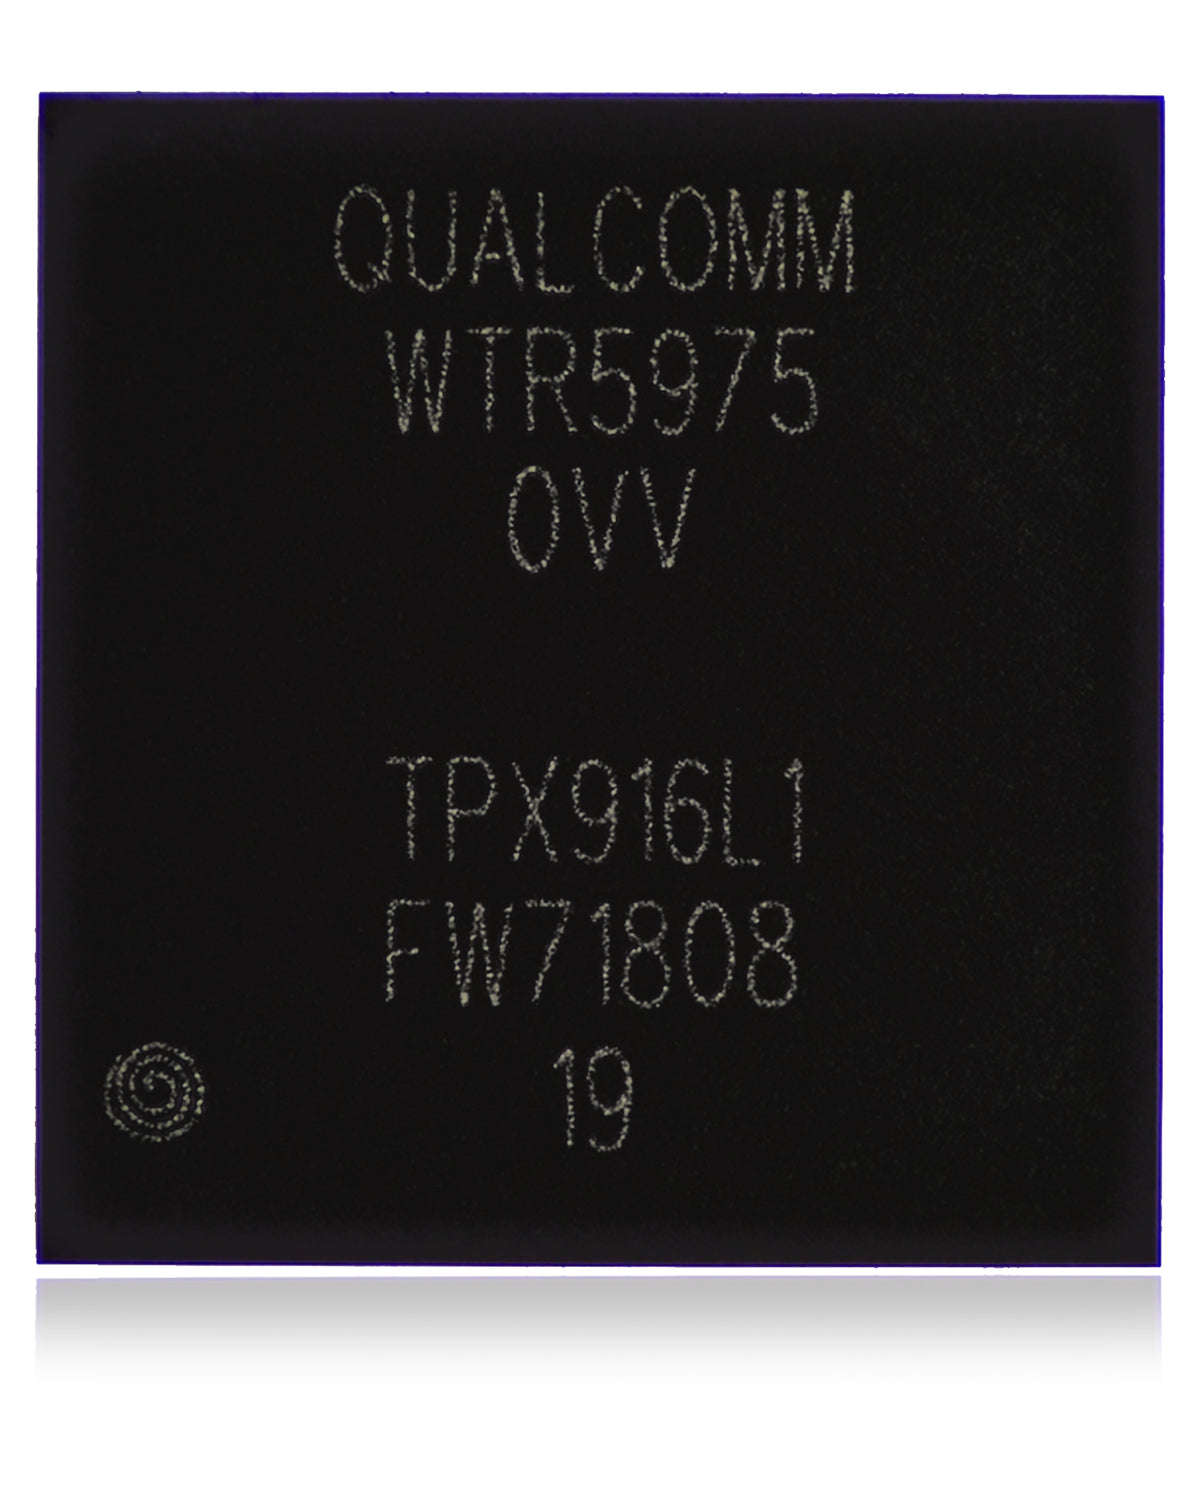 INTERMEDIATE FREQUENCY IC CHIP COMPATIBLE WITH IPHONE 8 / 8 PLUS / IPHONE X (WTR5975 0VV QUALCOMM VERSION)